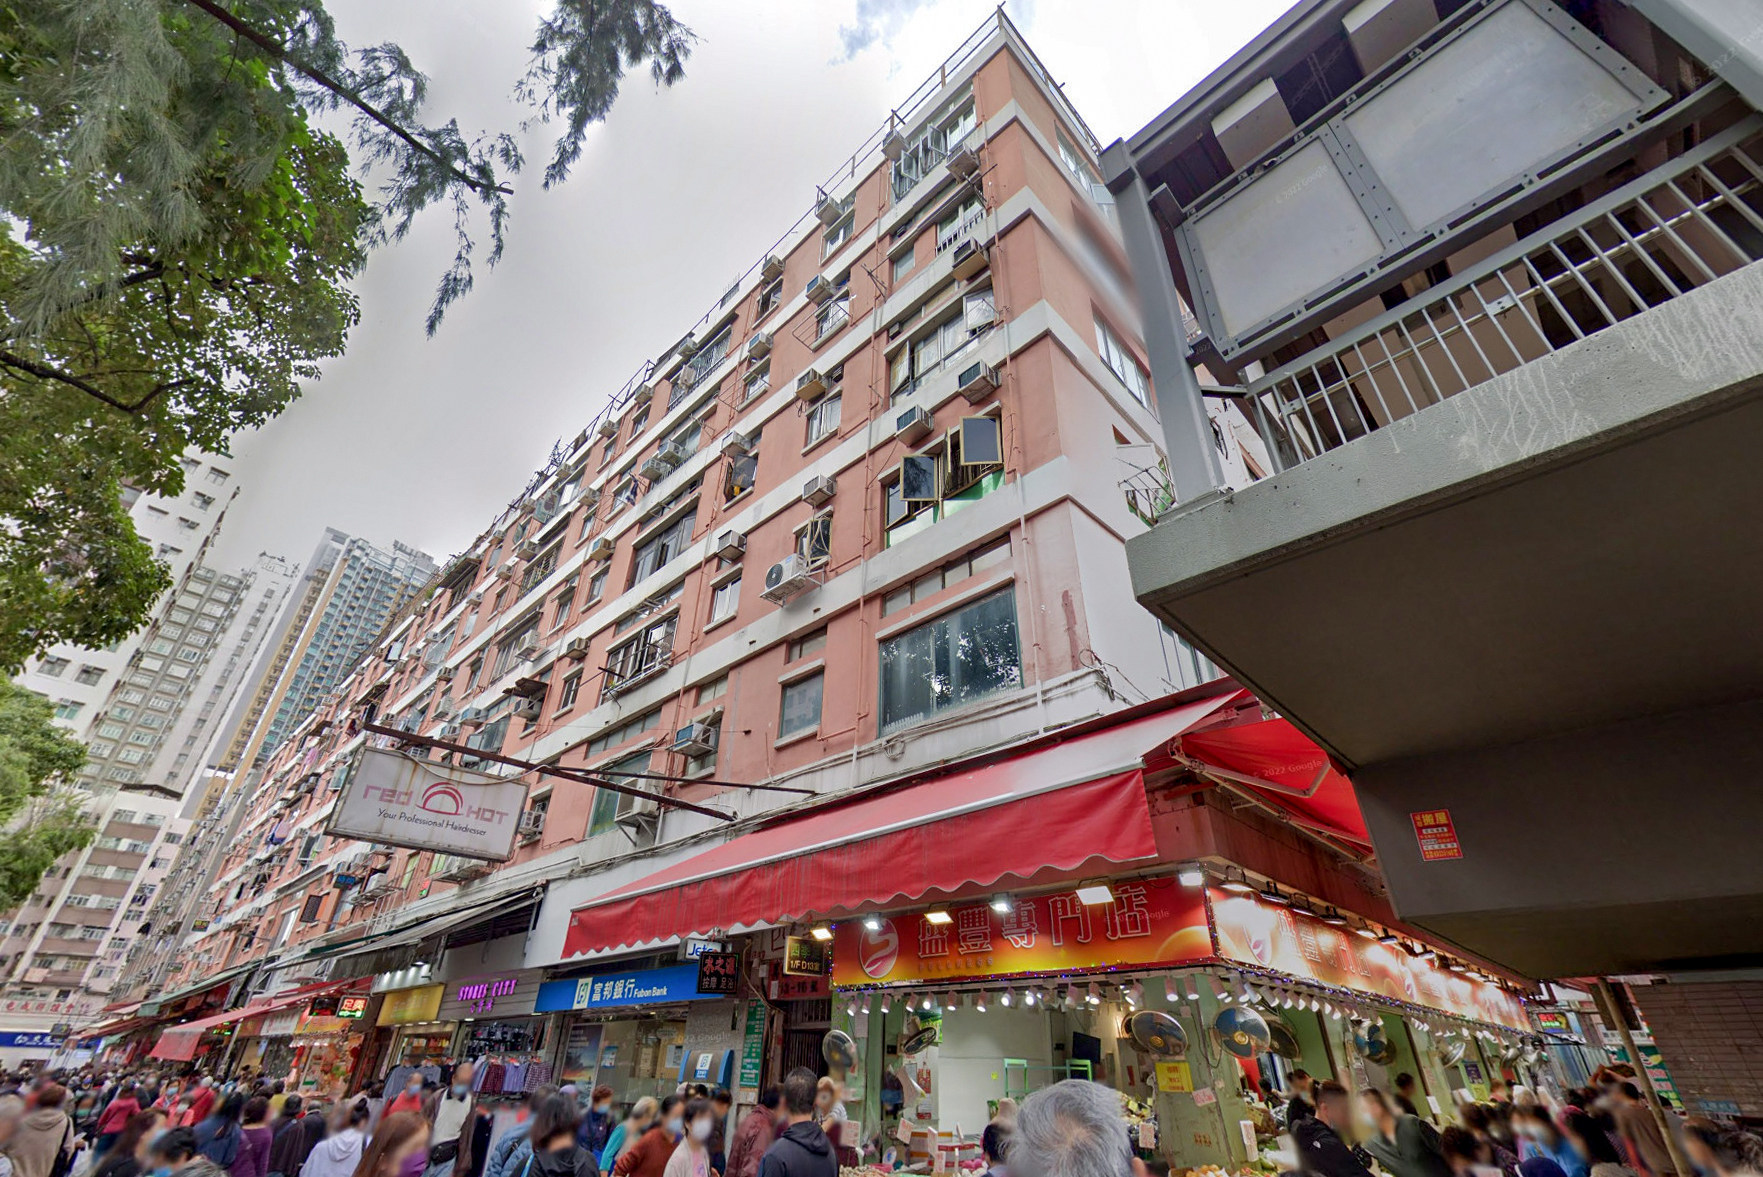 The Mei Hang Building on Kai Man Path in Tuen Mun, where the bodies of the two infants were found. Photo: Google